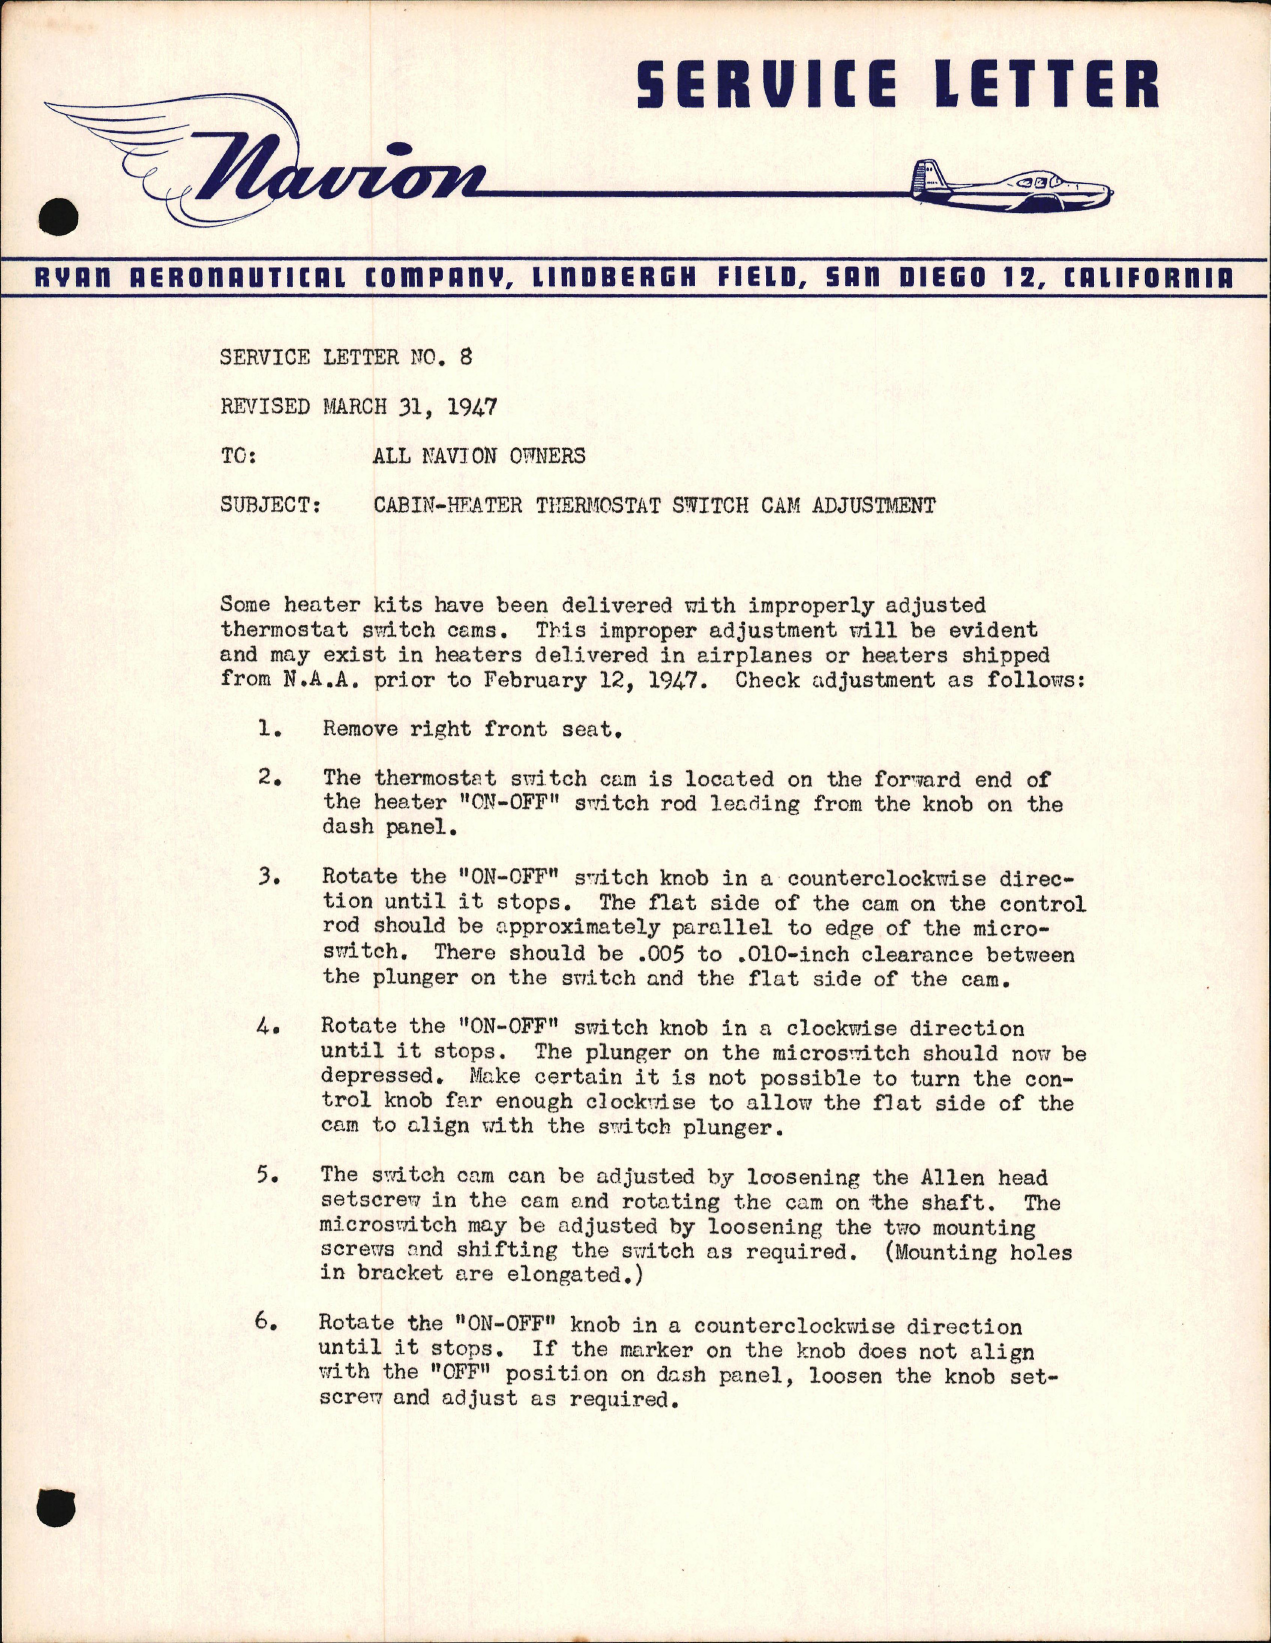 Sample page 1 from AirCorps Library document: Cabin Heater Thermostat Switch Cam Adjustment